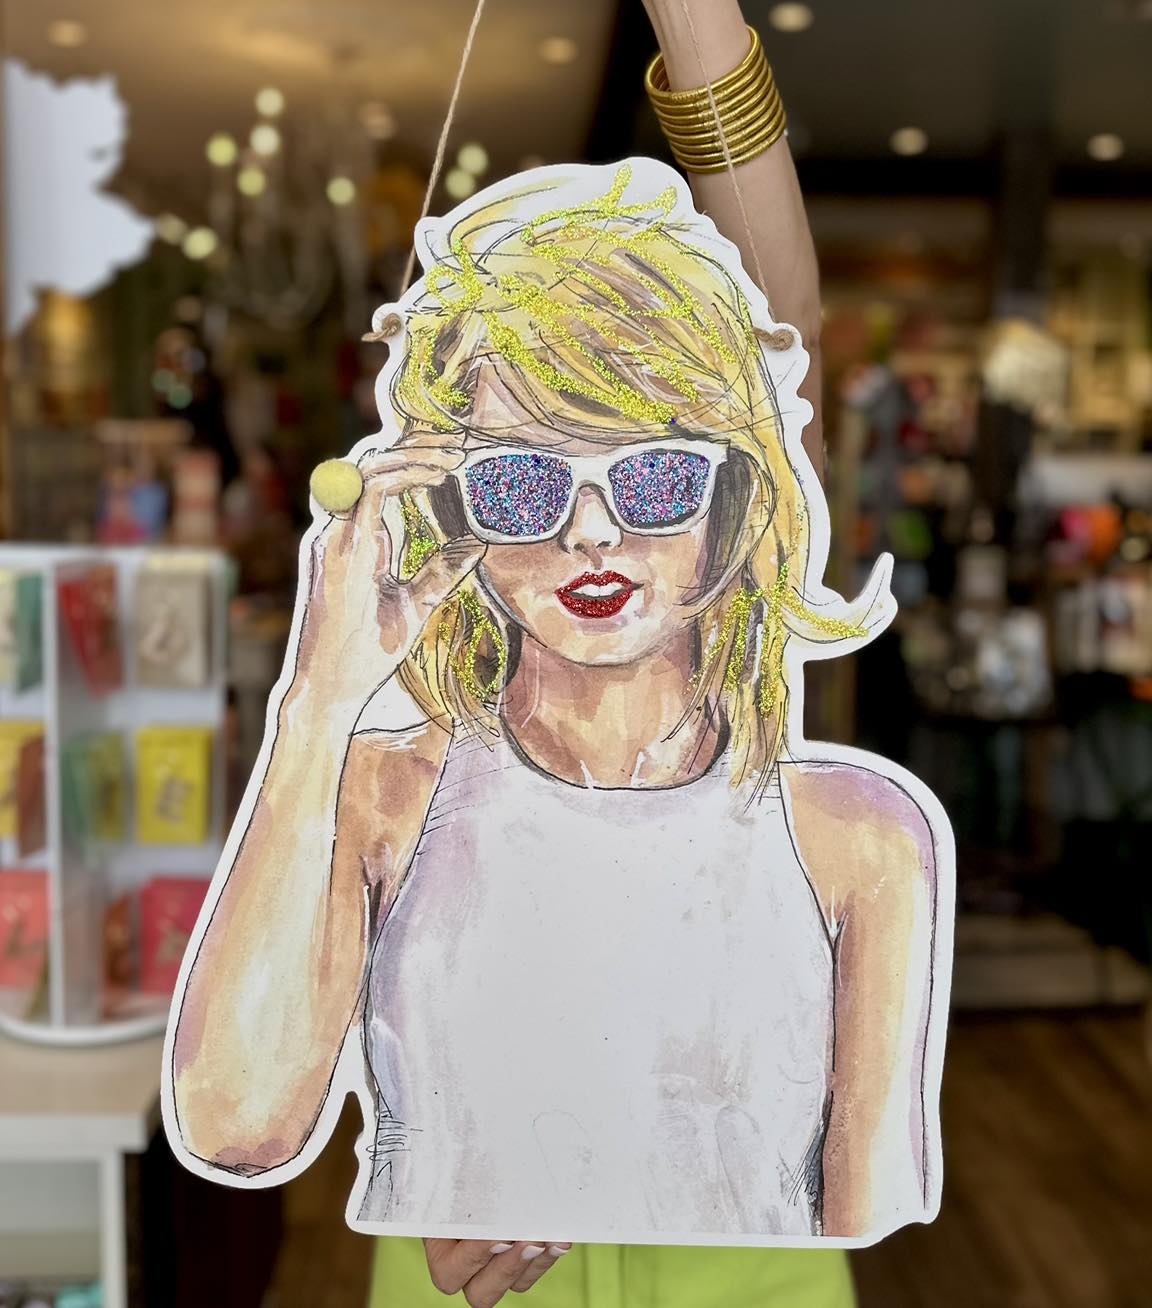 My Favorite Color is Sparkles Glitter Taylor Swift Sticker - Little Color  Company